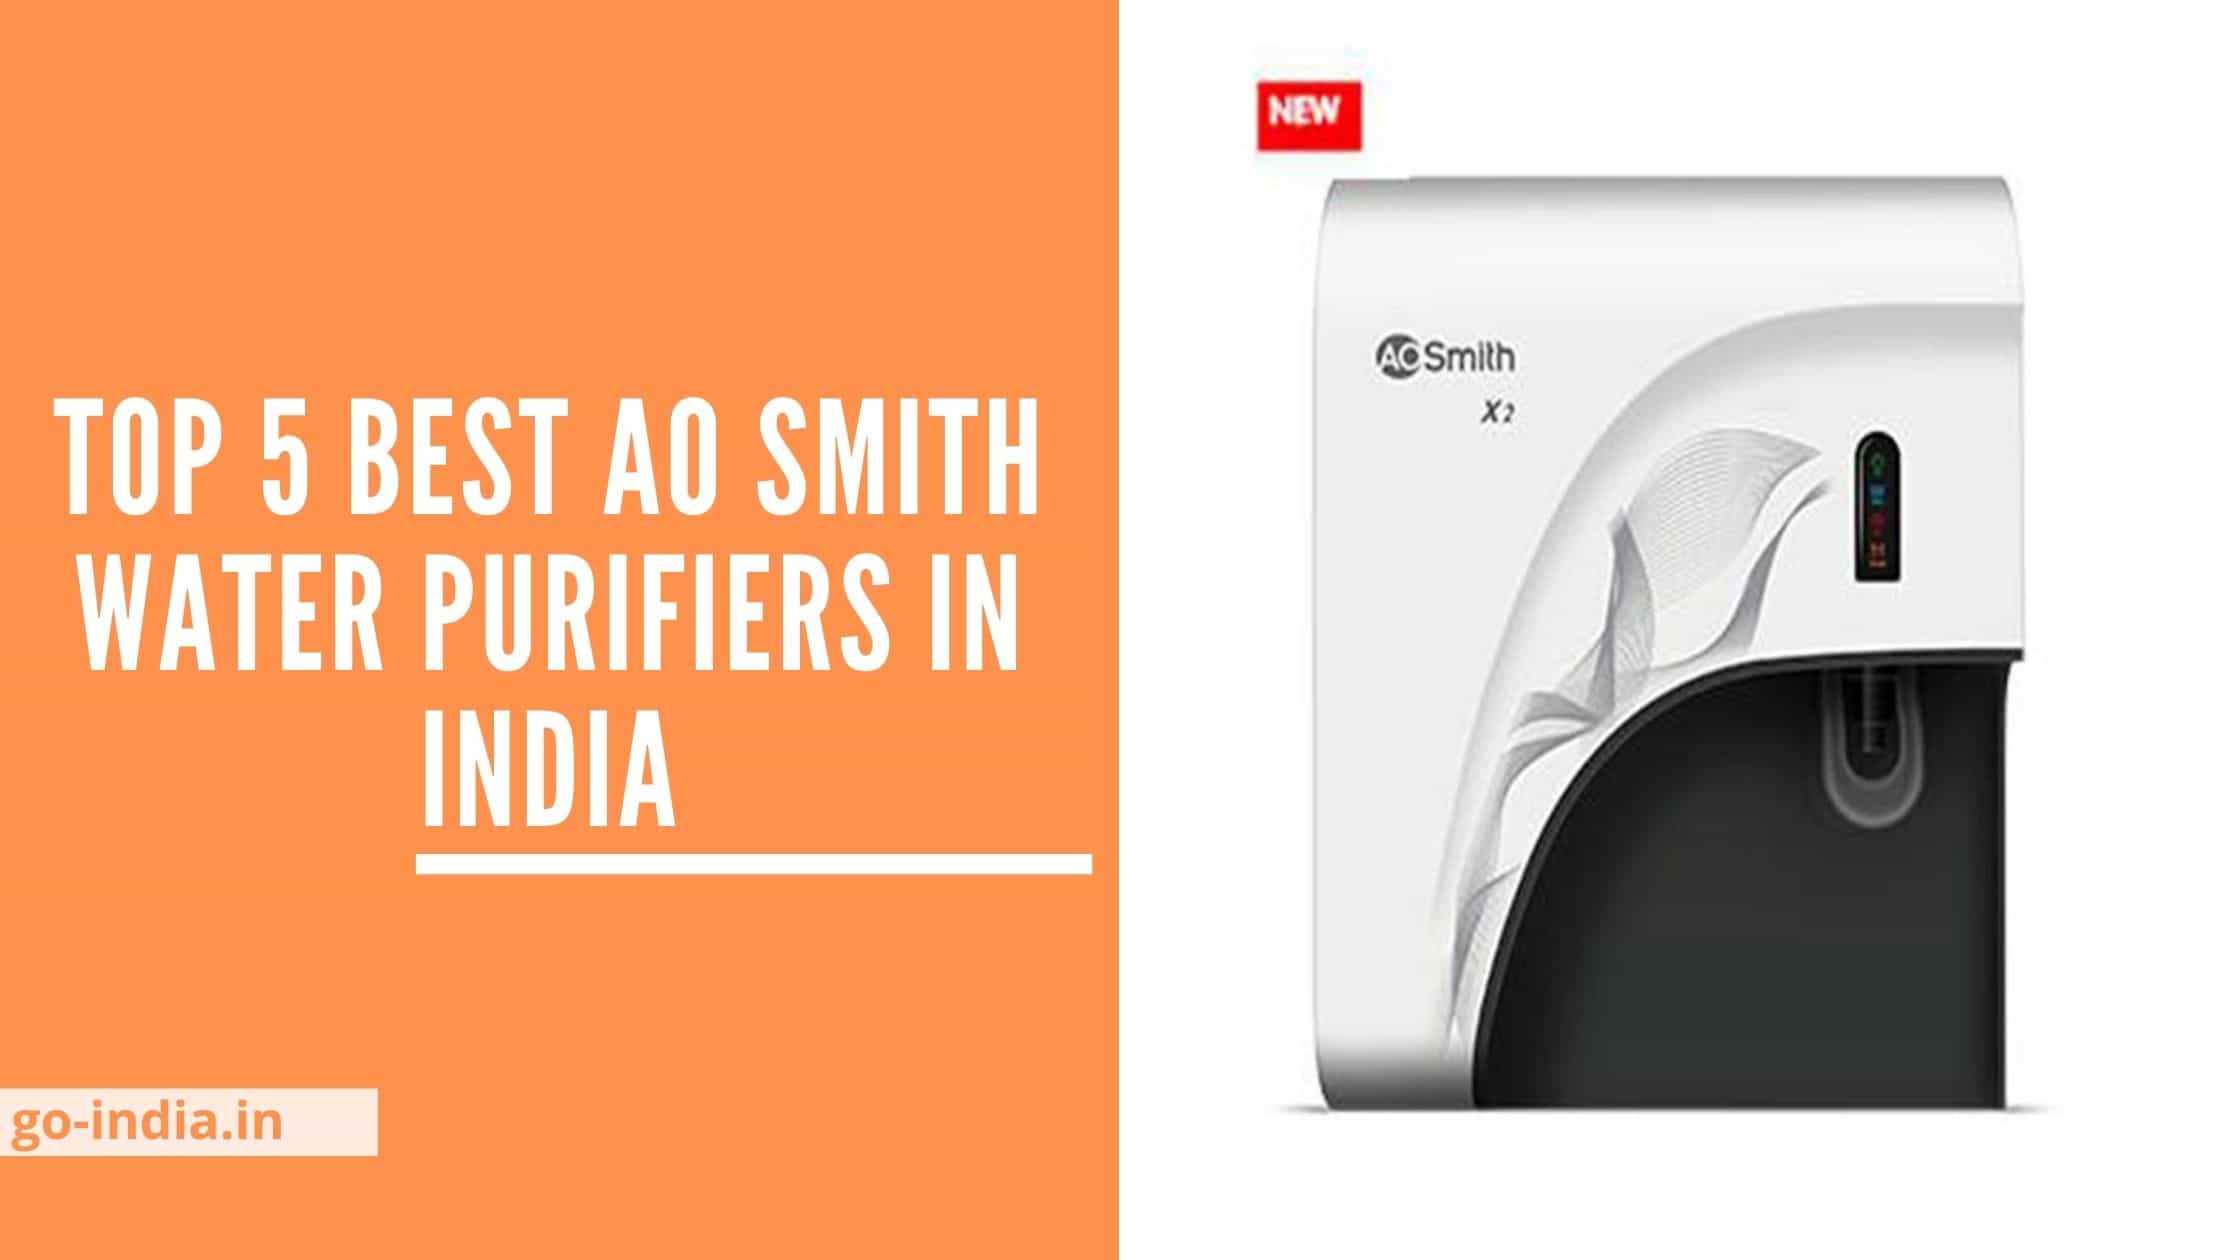 Top 5 Best AO Smith Water Purifiers in India (2022)